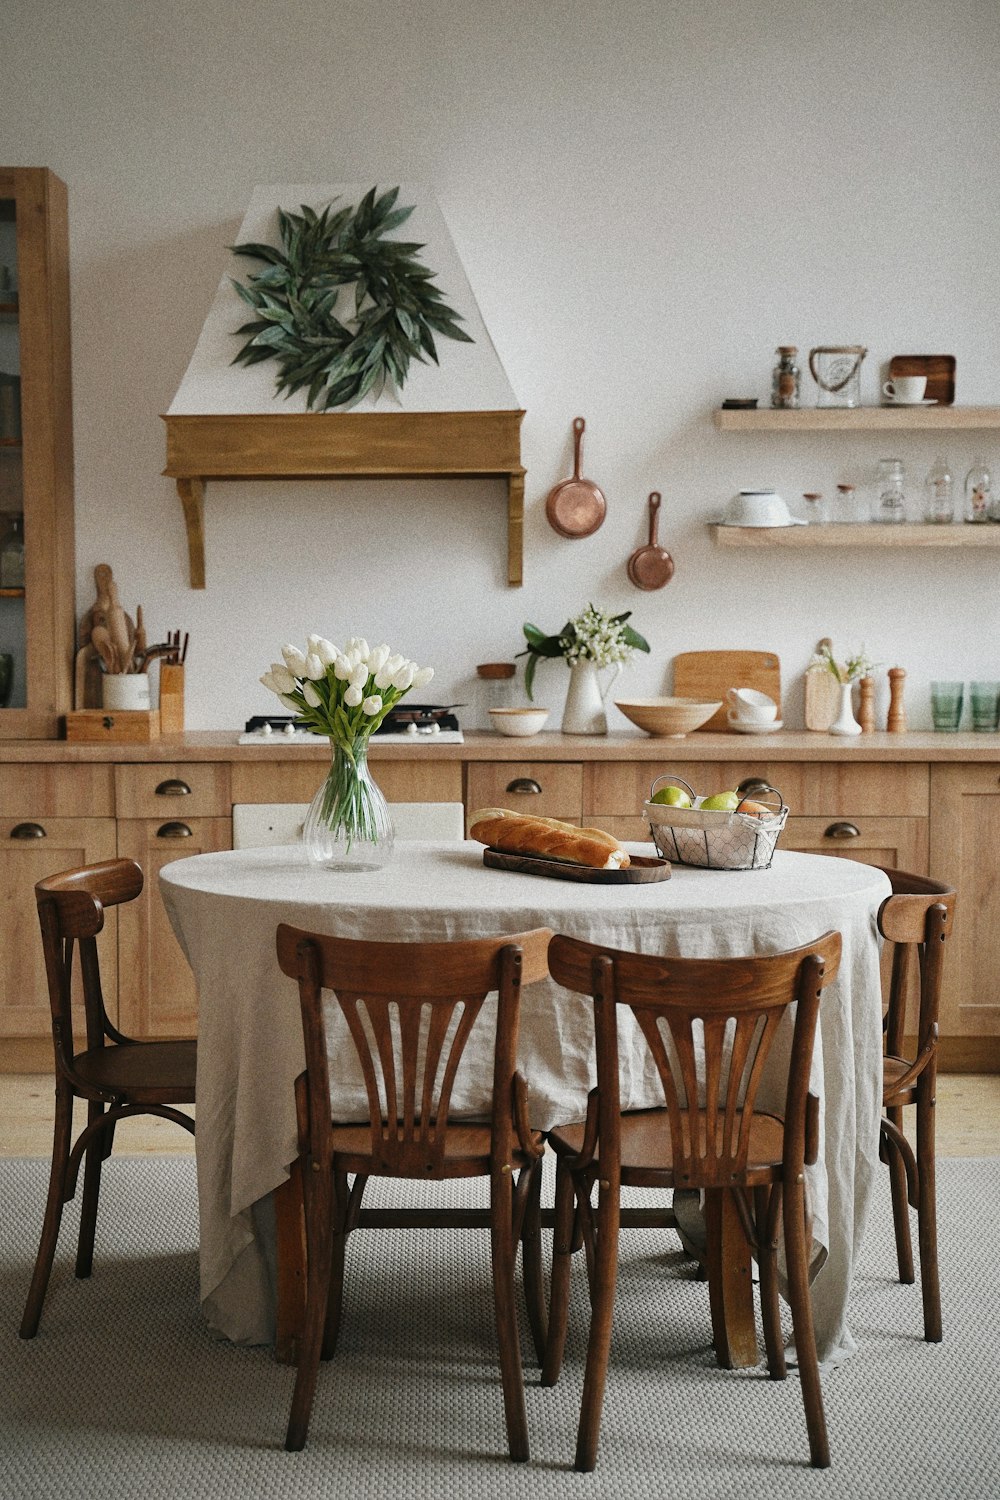 a round dining table in the kitchen.